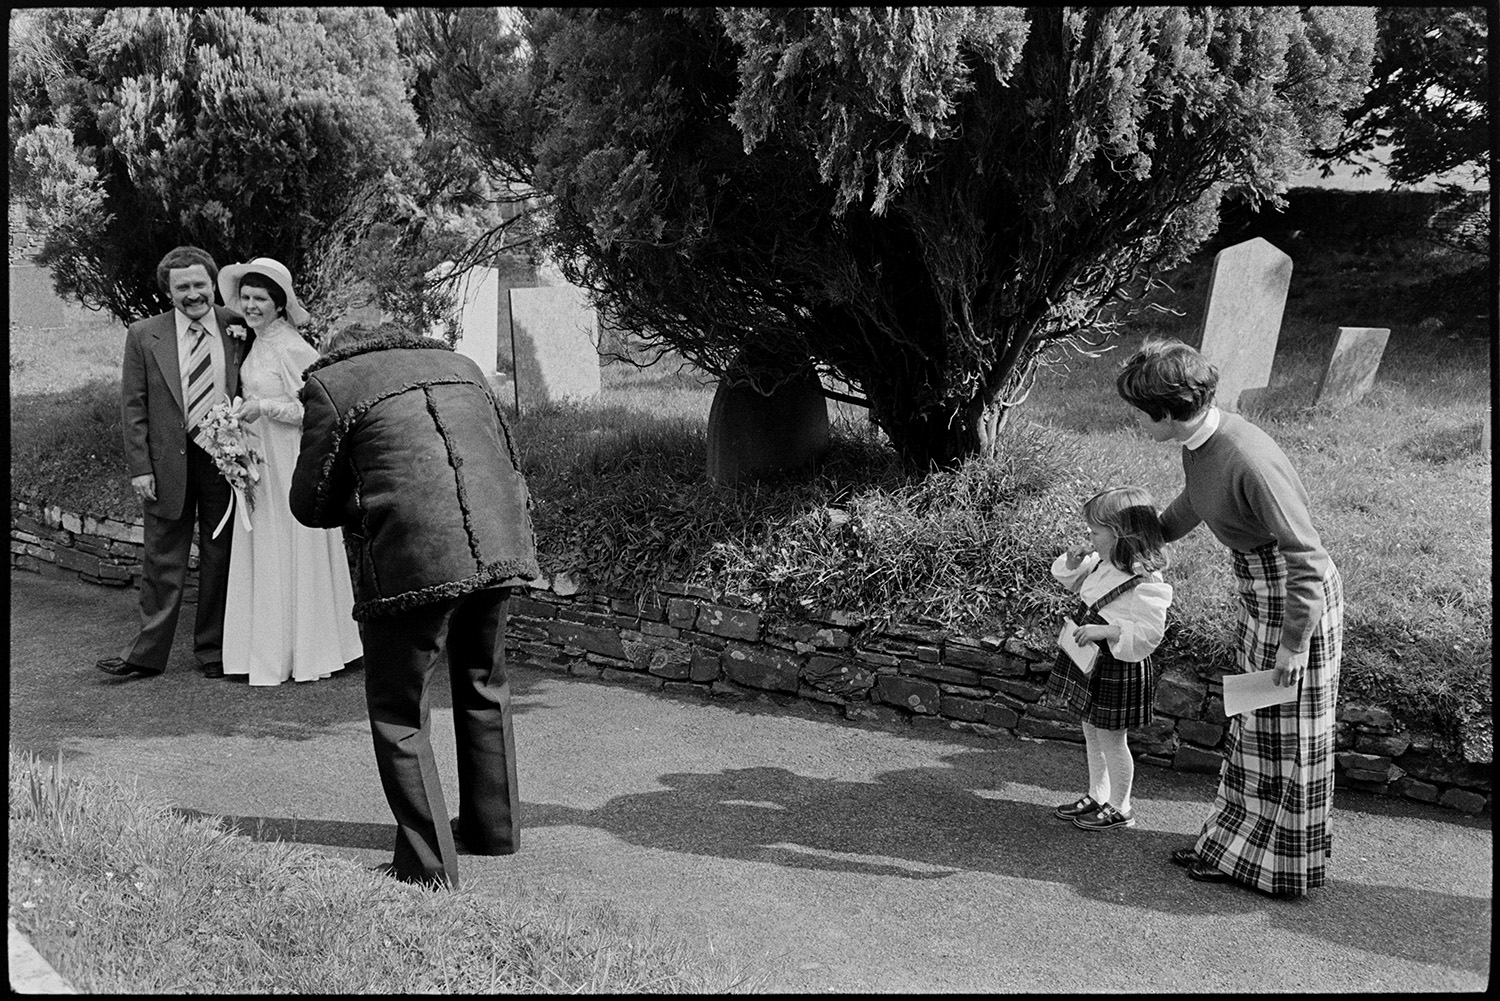 After wedding, bride, groom and guests, photographer at work. 
[A photographer taking pictures of Mary Pugsley and her groom after their wedding, in Dolton Churchyard. Two wedding guests, a woman and young girl, are watching.]